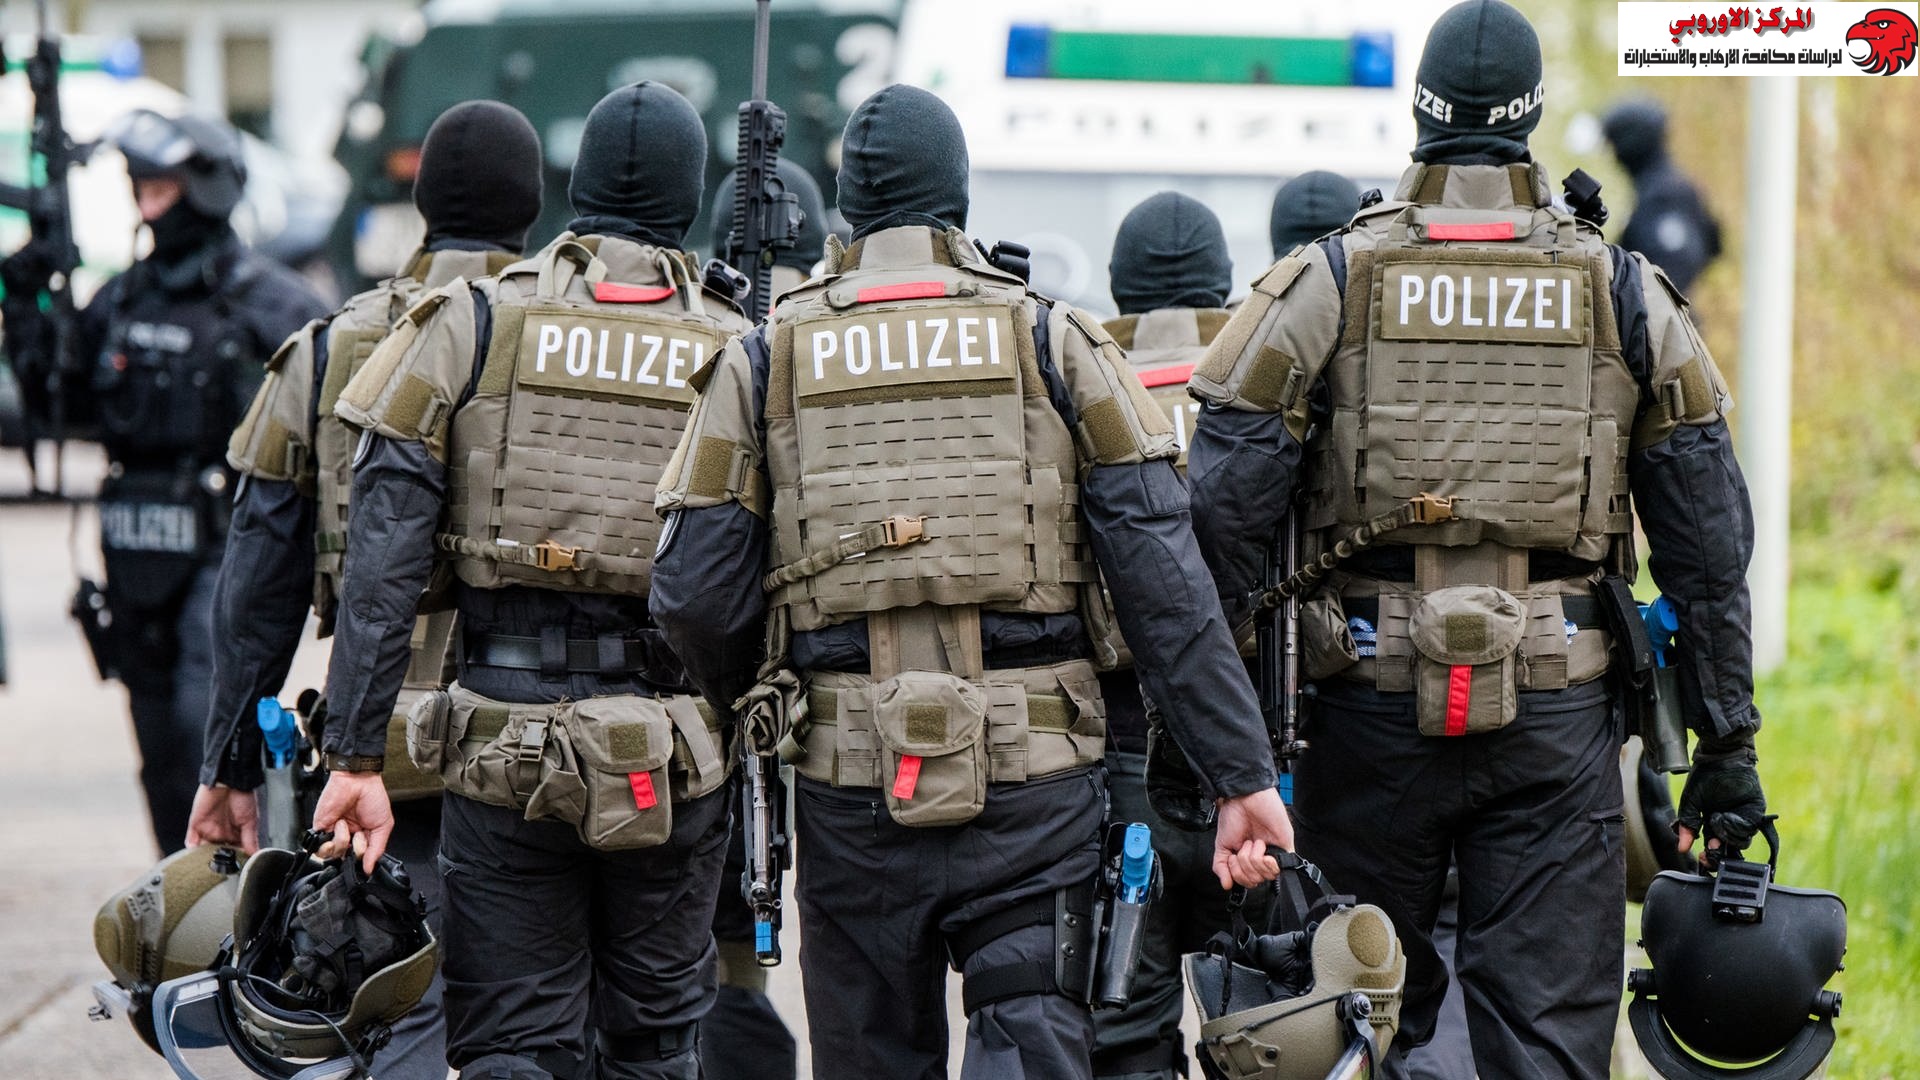 Germany: Man suspected of planning 'serious act of violence'